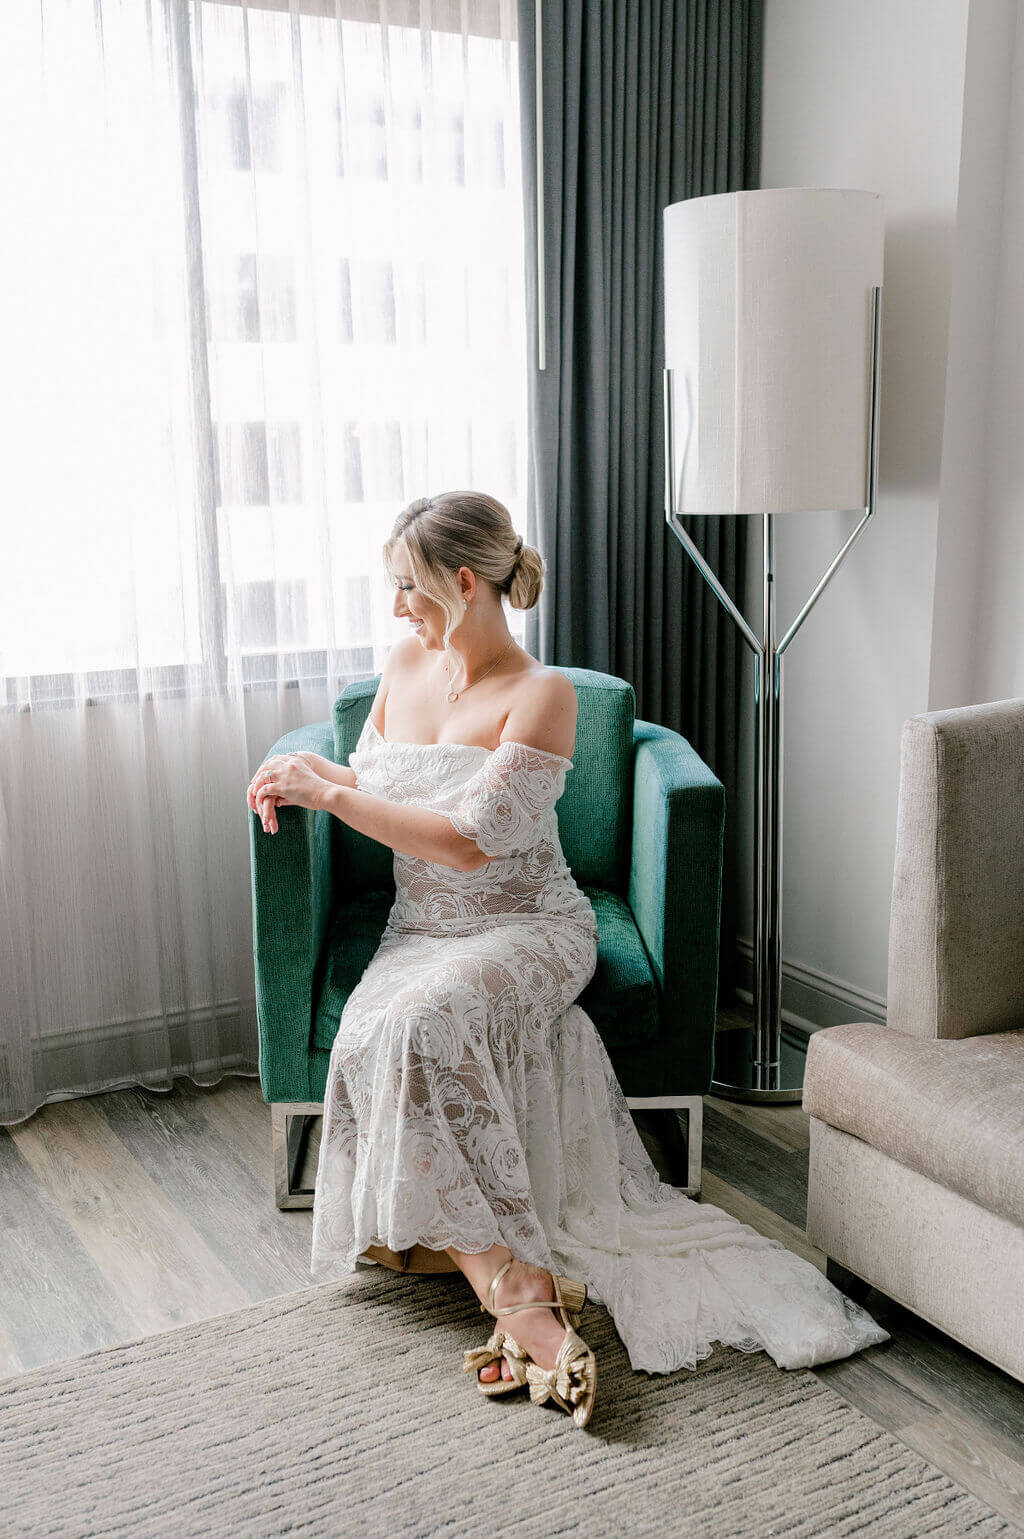 A simple bridal portrait of a bride sitting in a green chair.